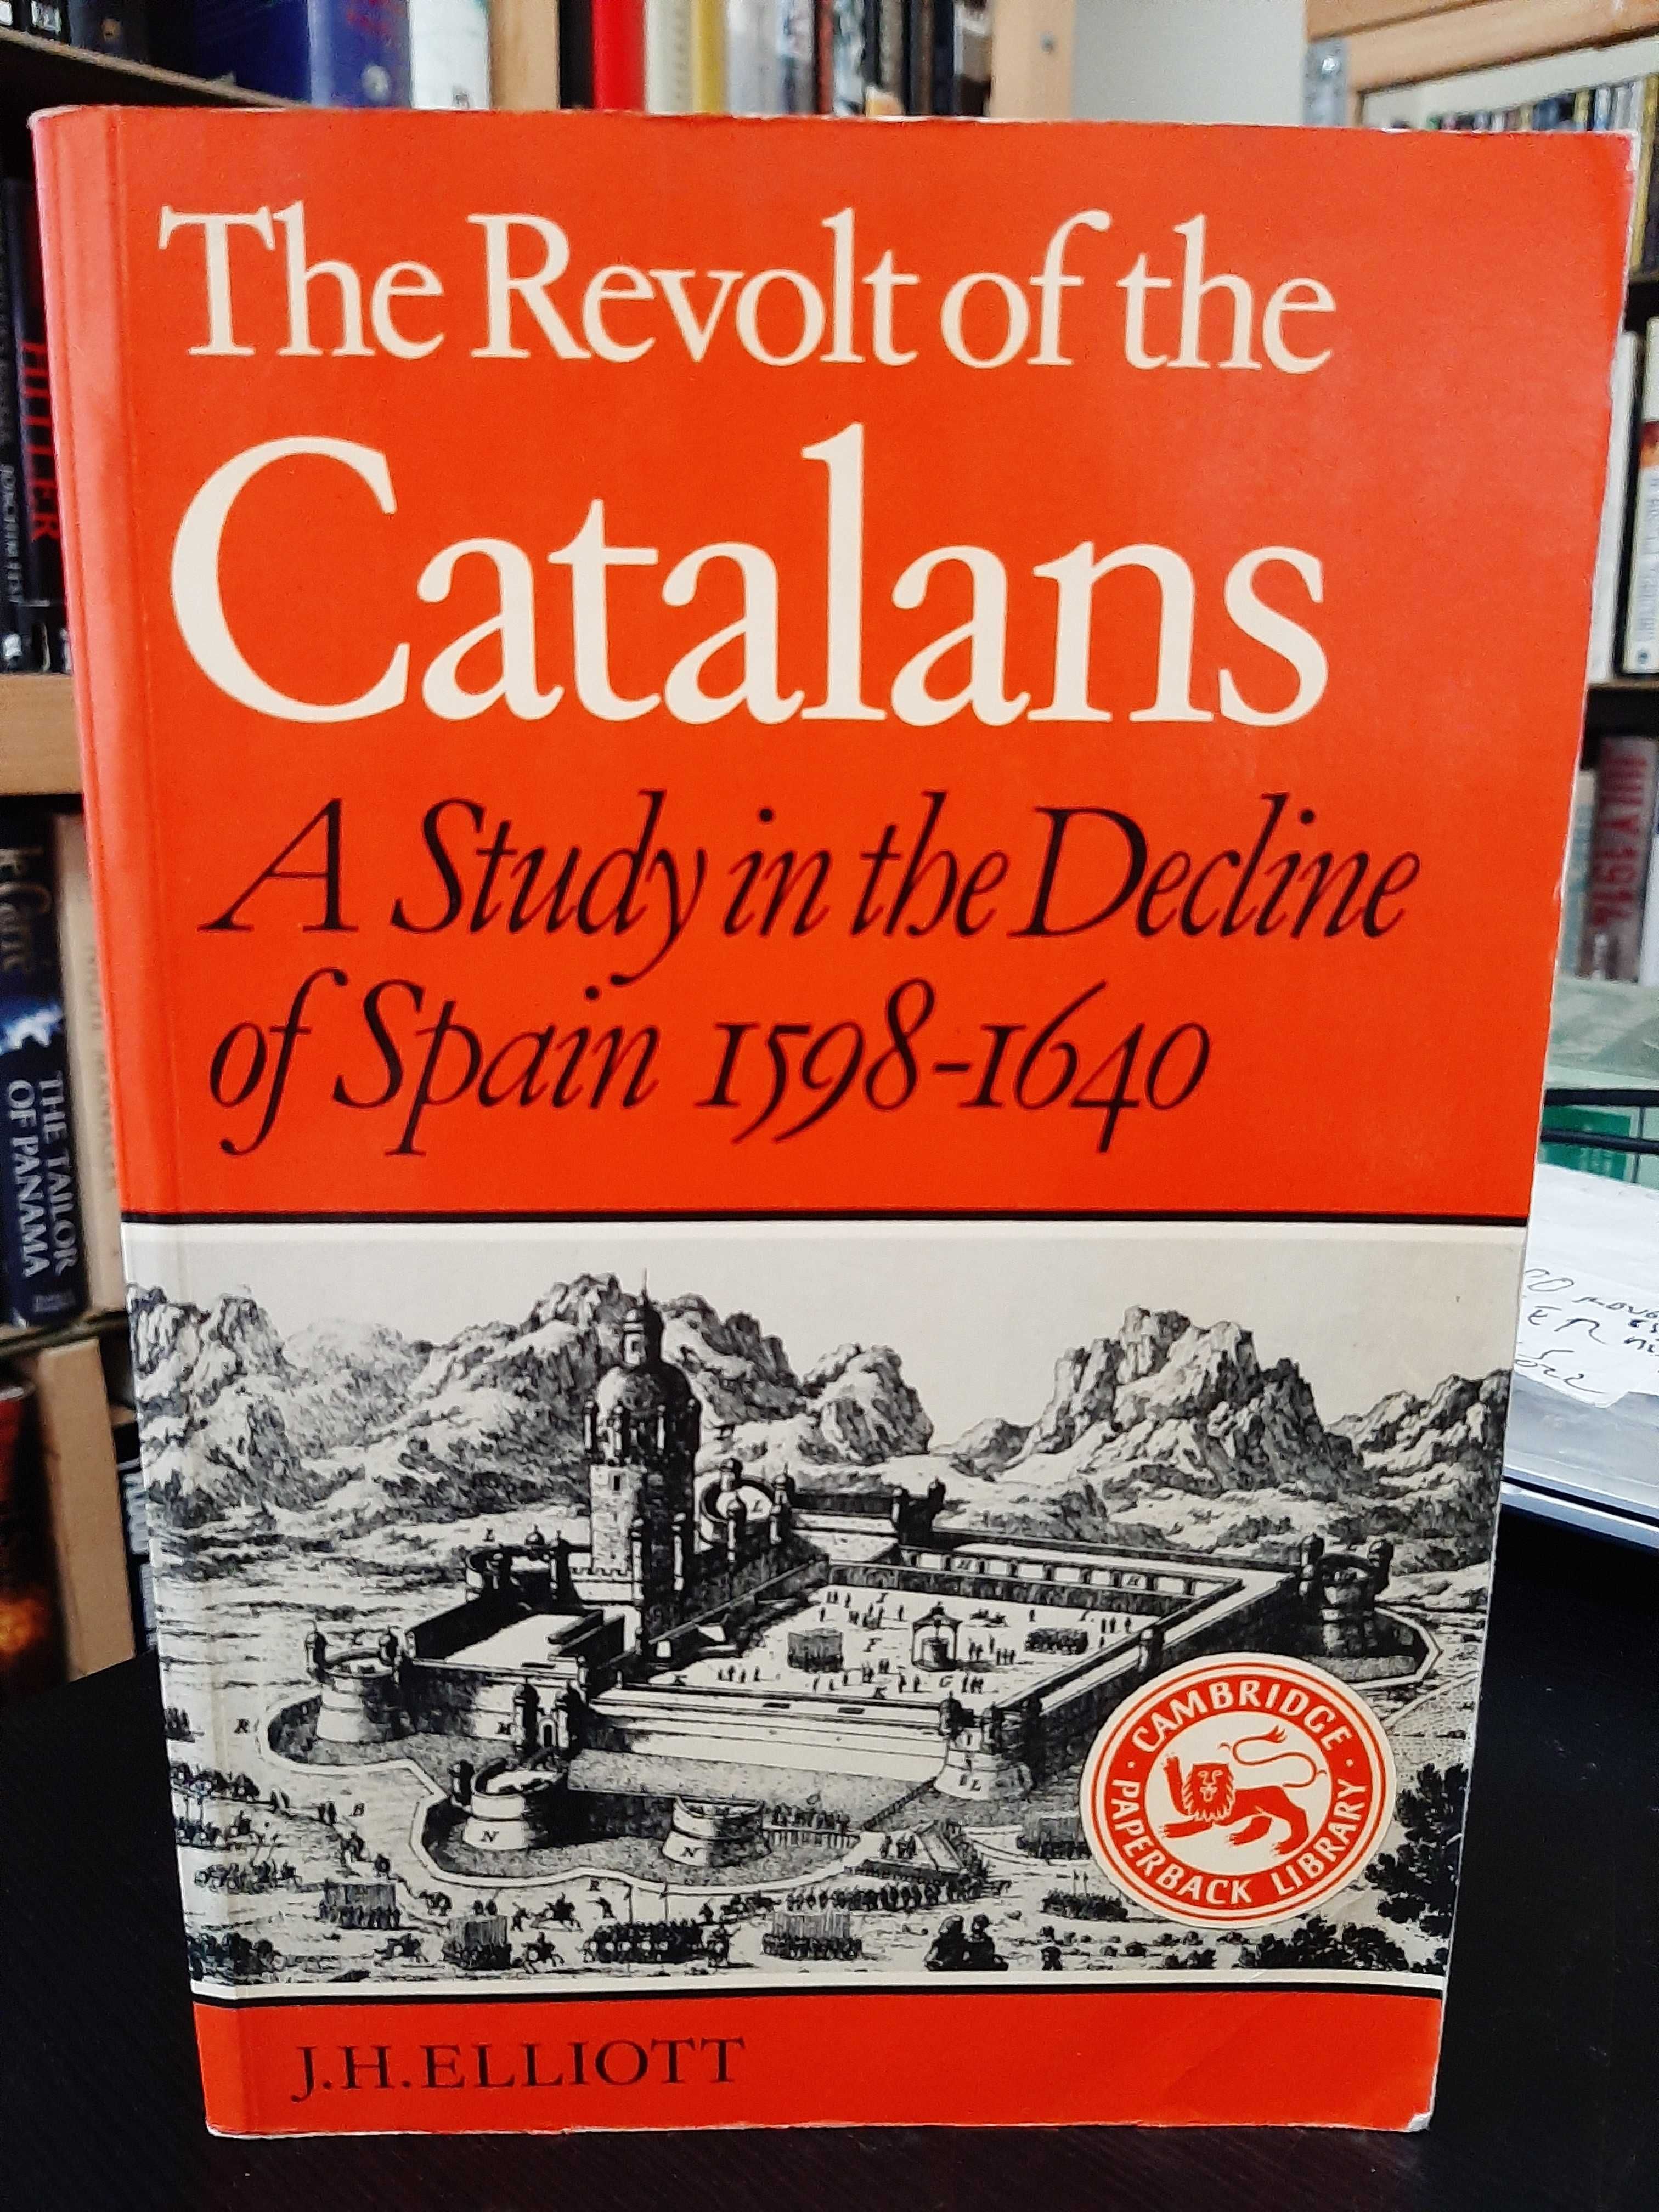 JH Elliott – The Revolt of the Catalans: Decline of Spain: 1598 a 1640